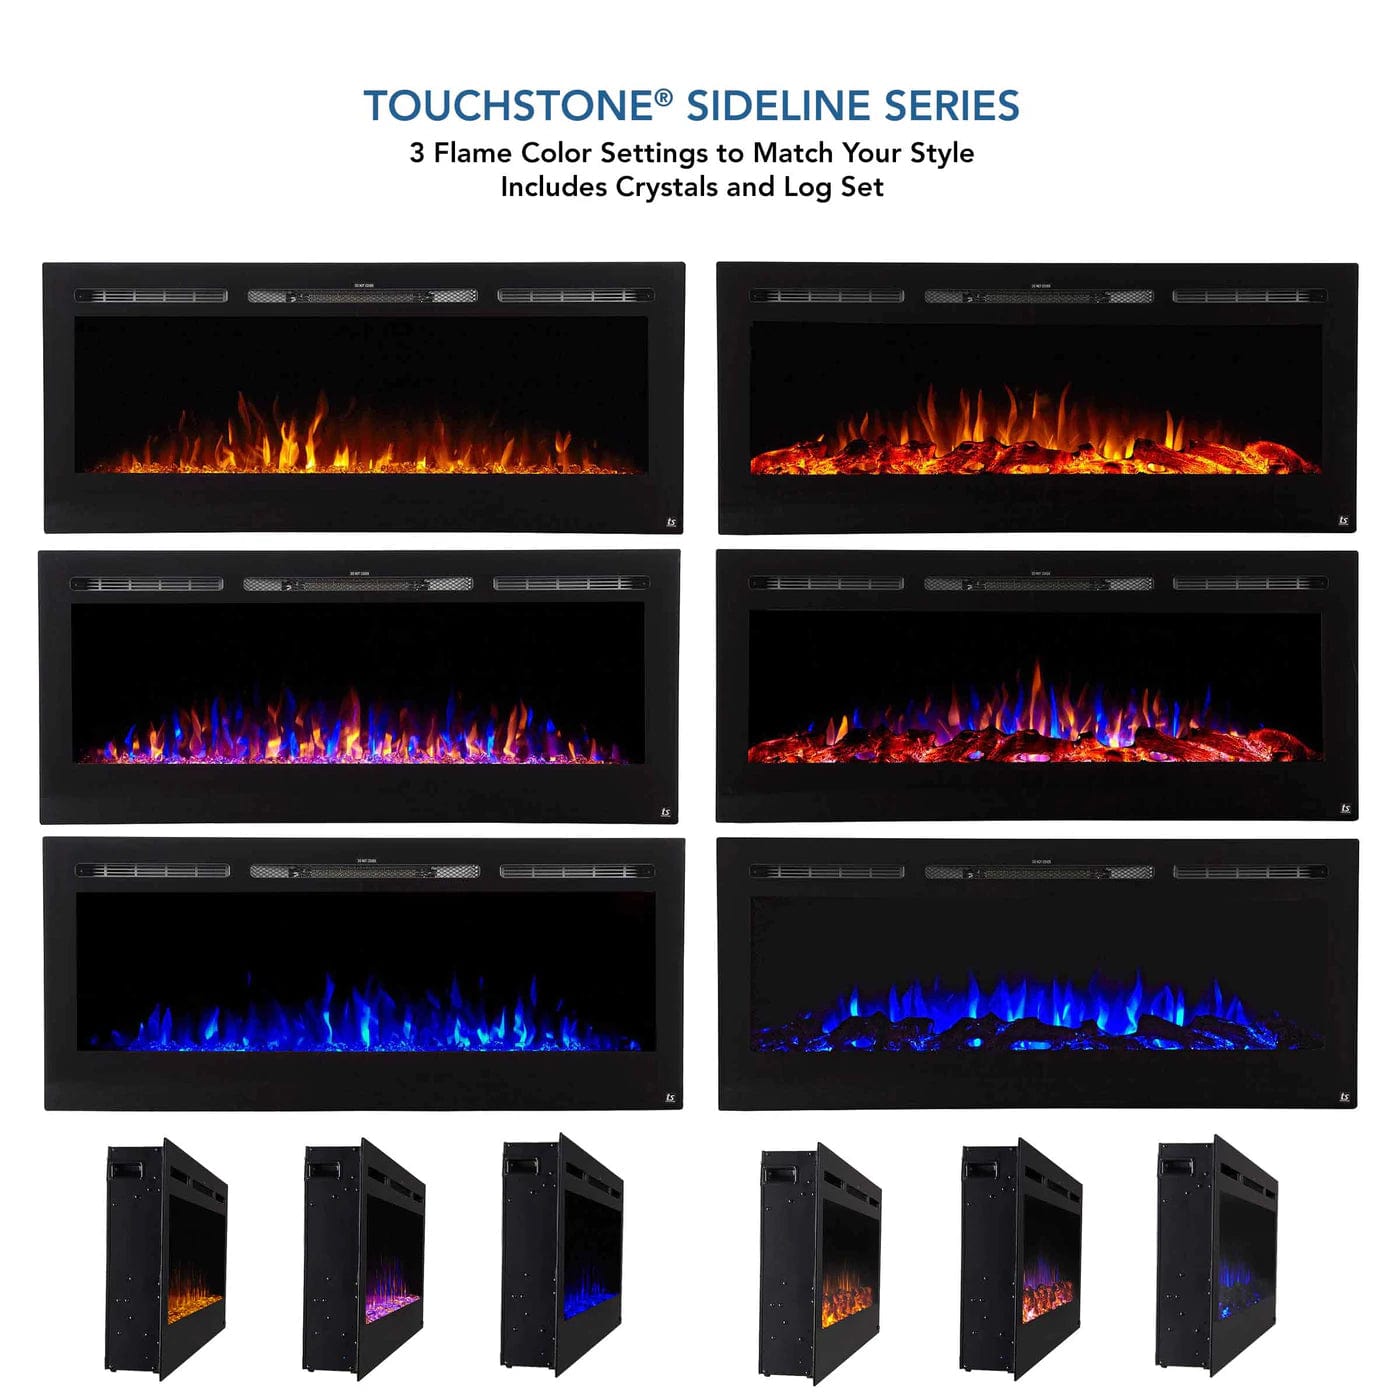 The Touchstone Sideline and Forte Electric Fireplaces have 3 flame colors and include crystals and logs